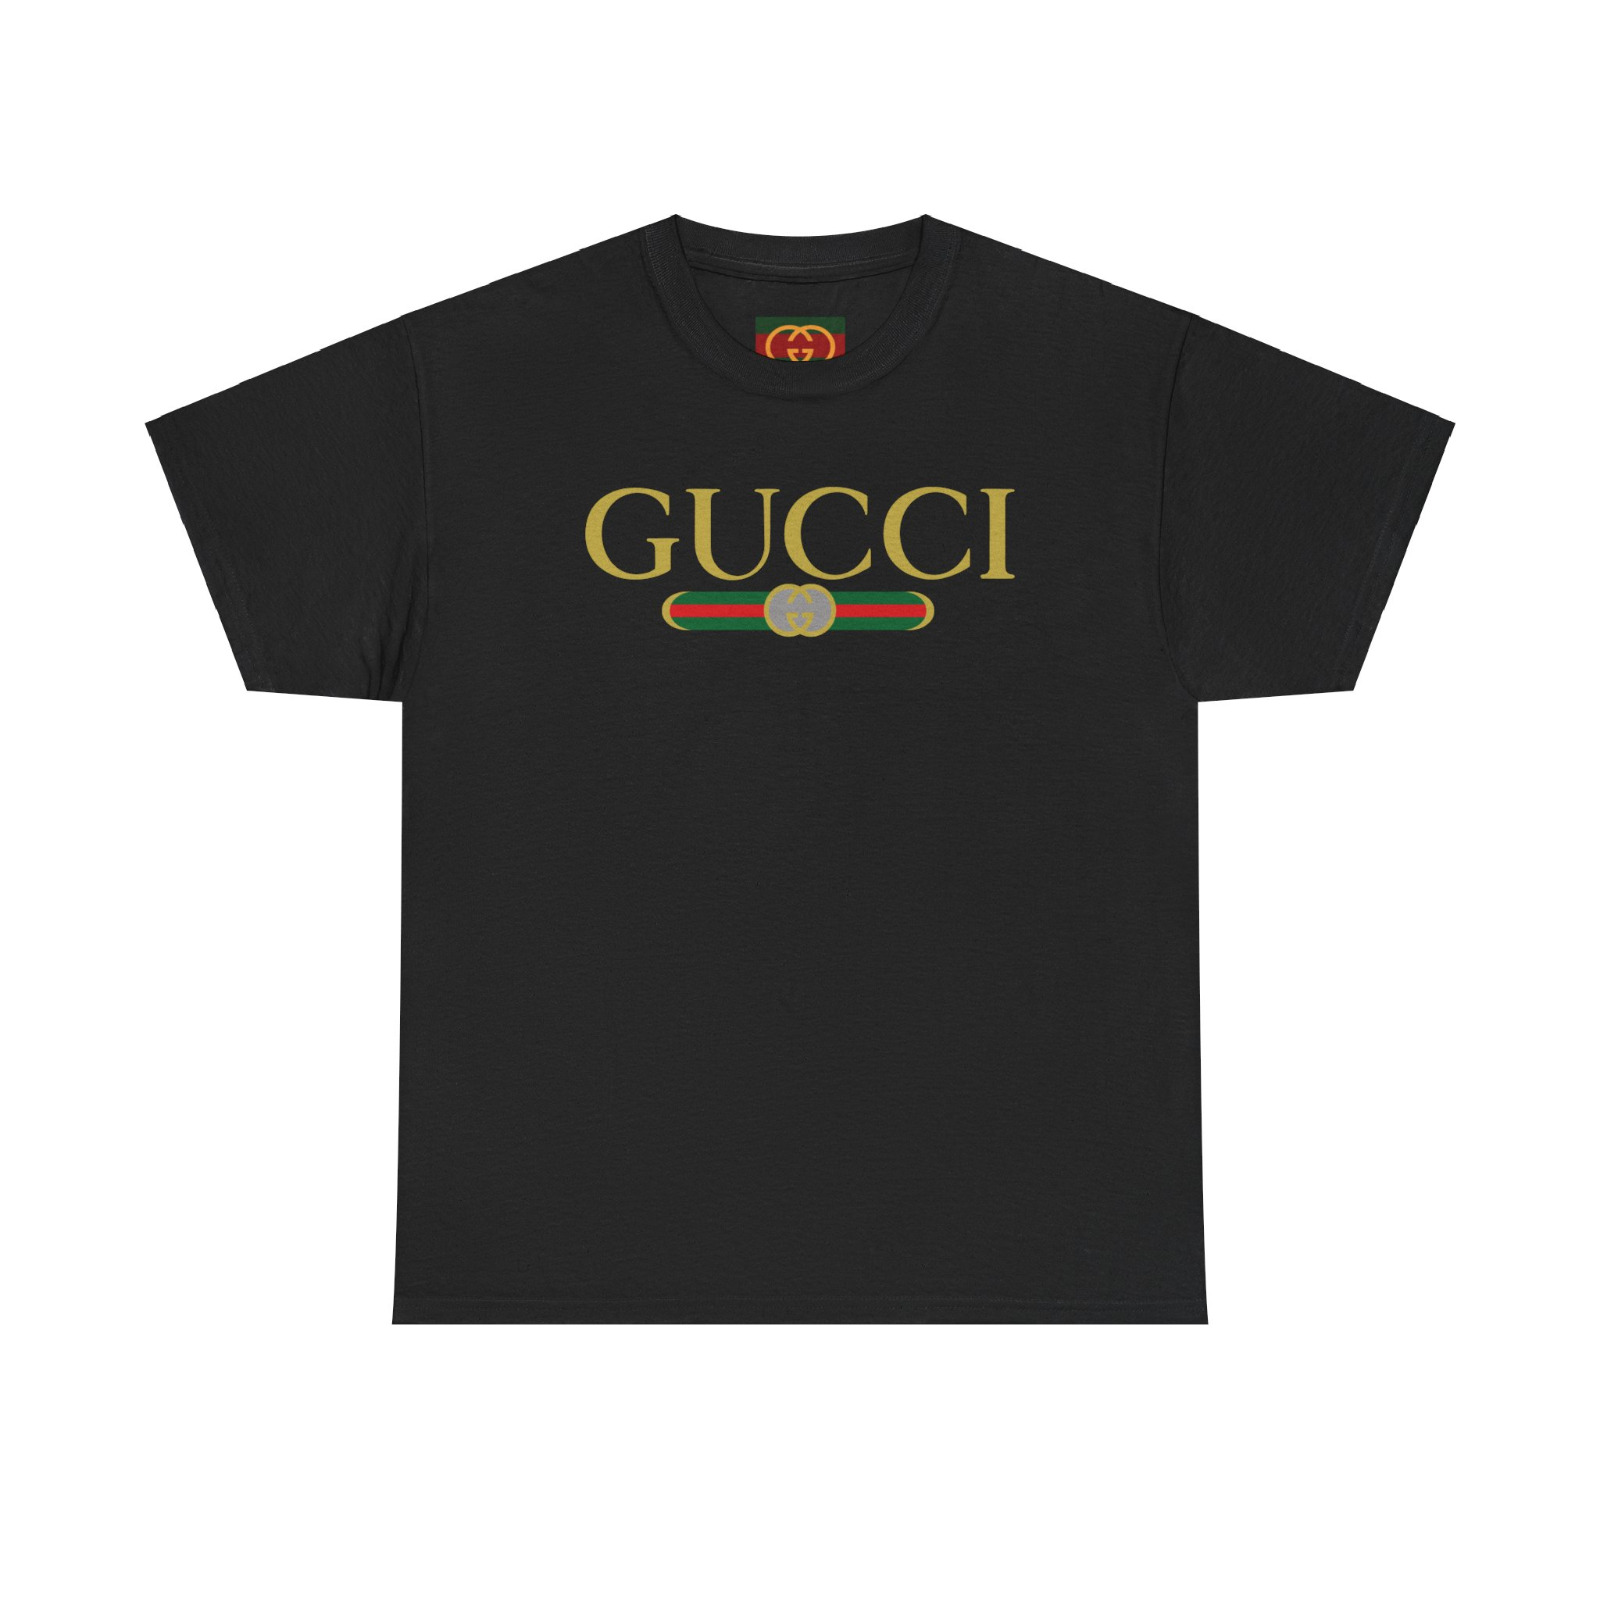 New Gucci Limited Edition Logo Men's T-Shirt Tee Size S-5XL USA HOT